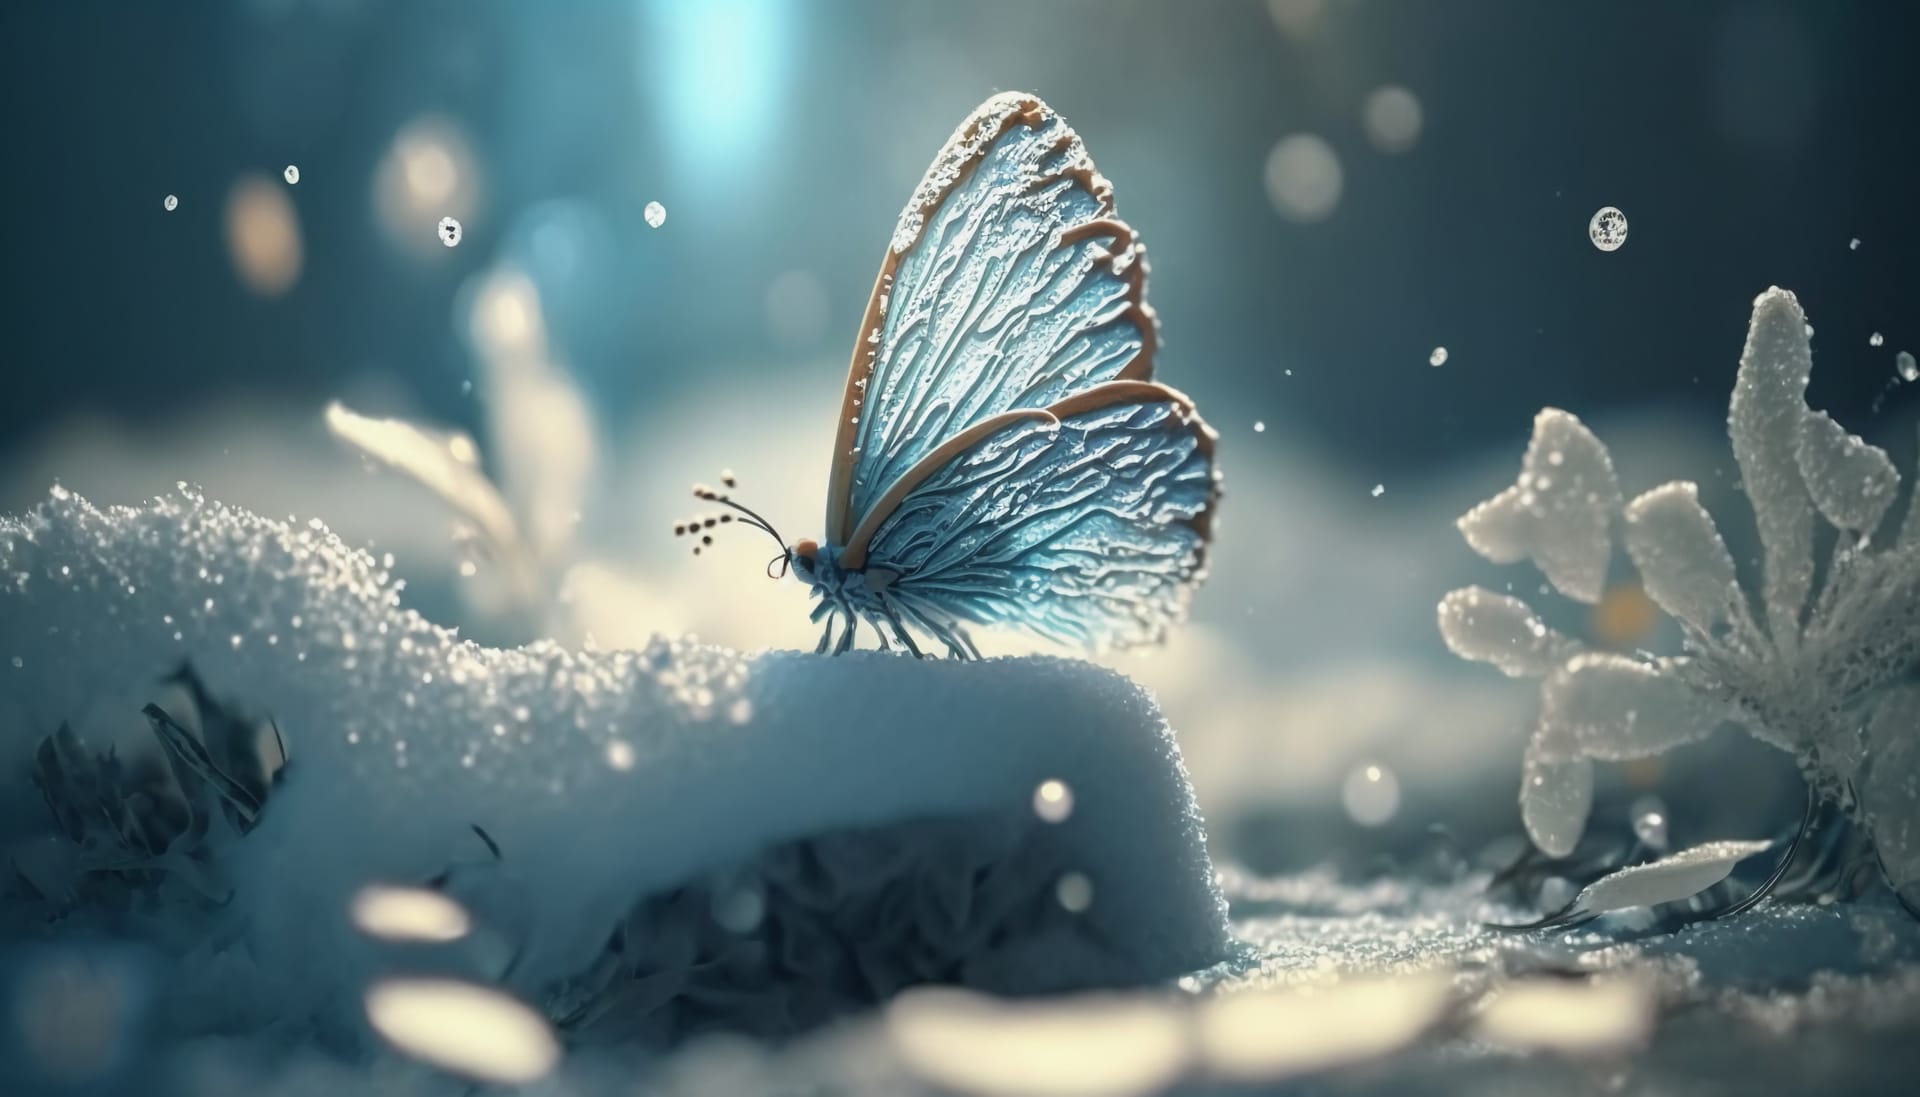 Ice snowa light blue ice butterfly falls picture